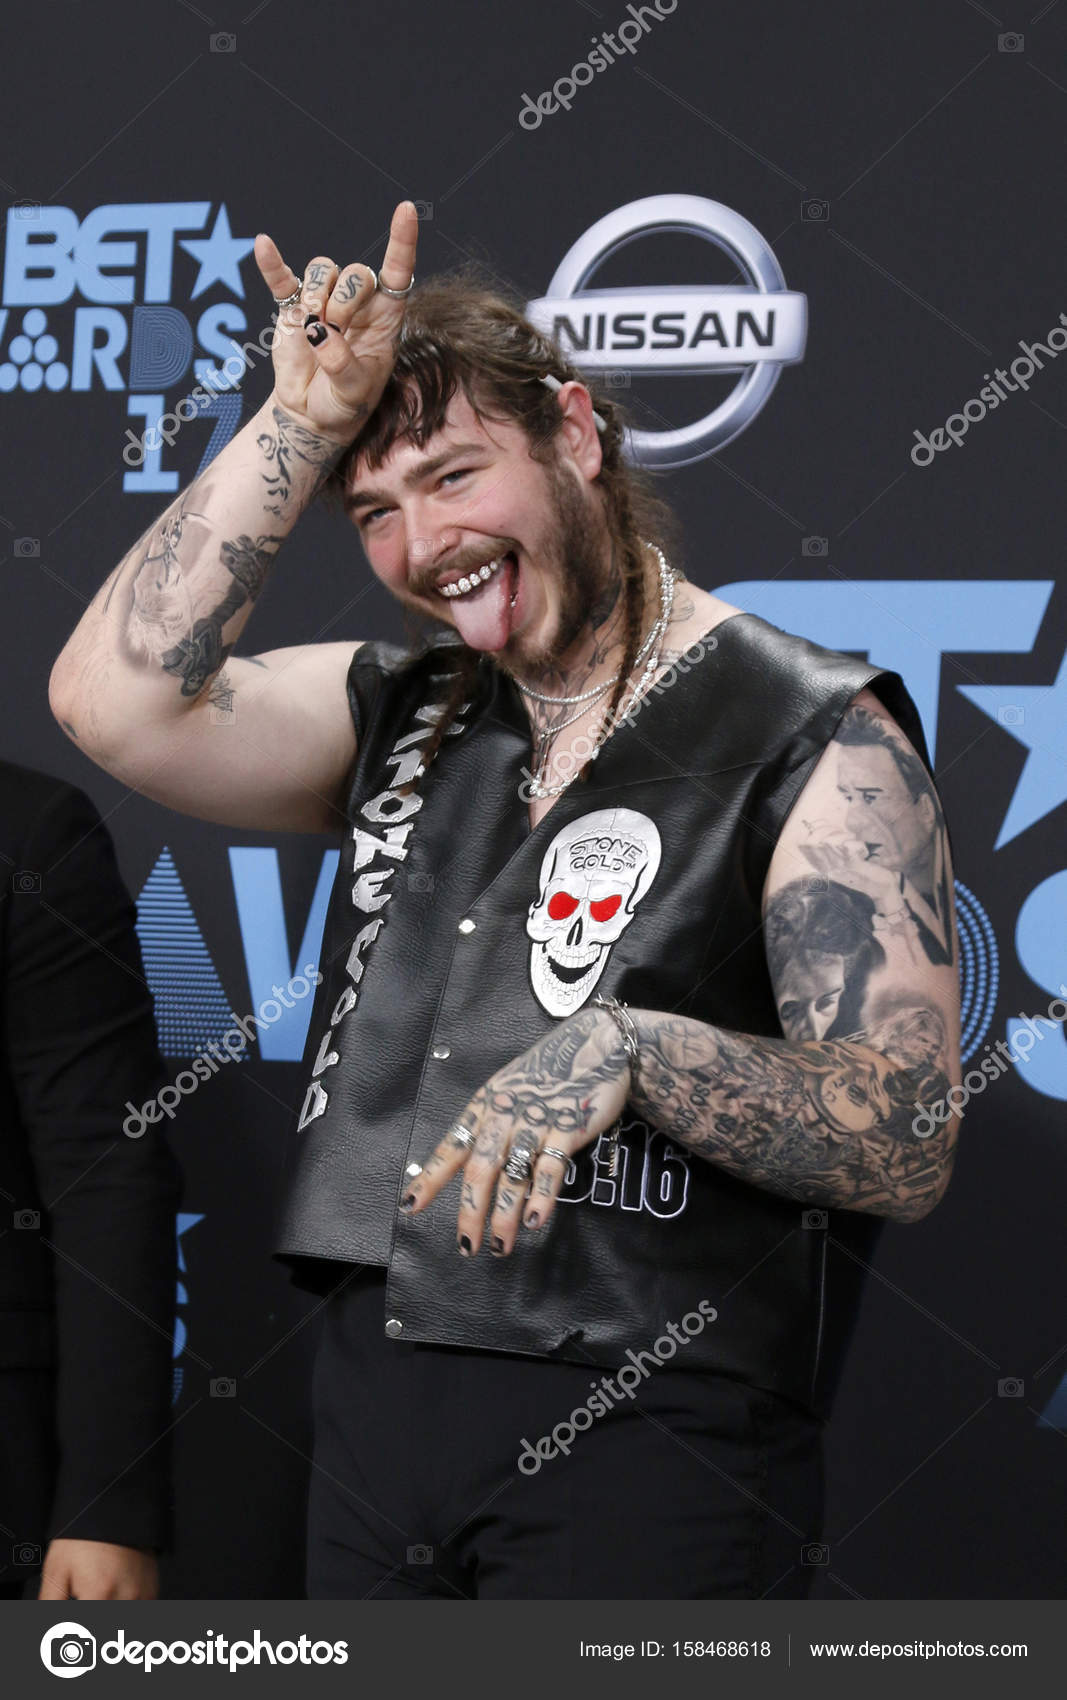 Post Malone at the BET Awards 2017 – Stock Editorial Photo © Jean ...